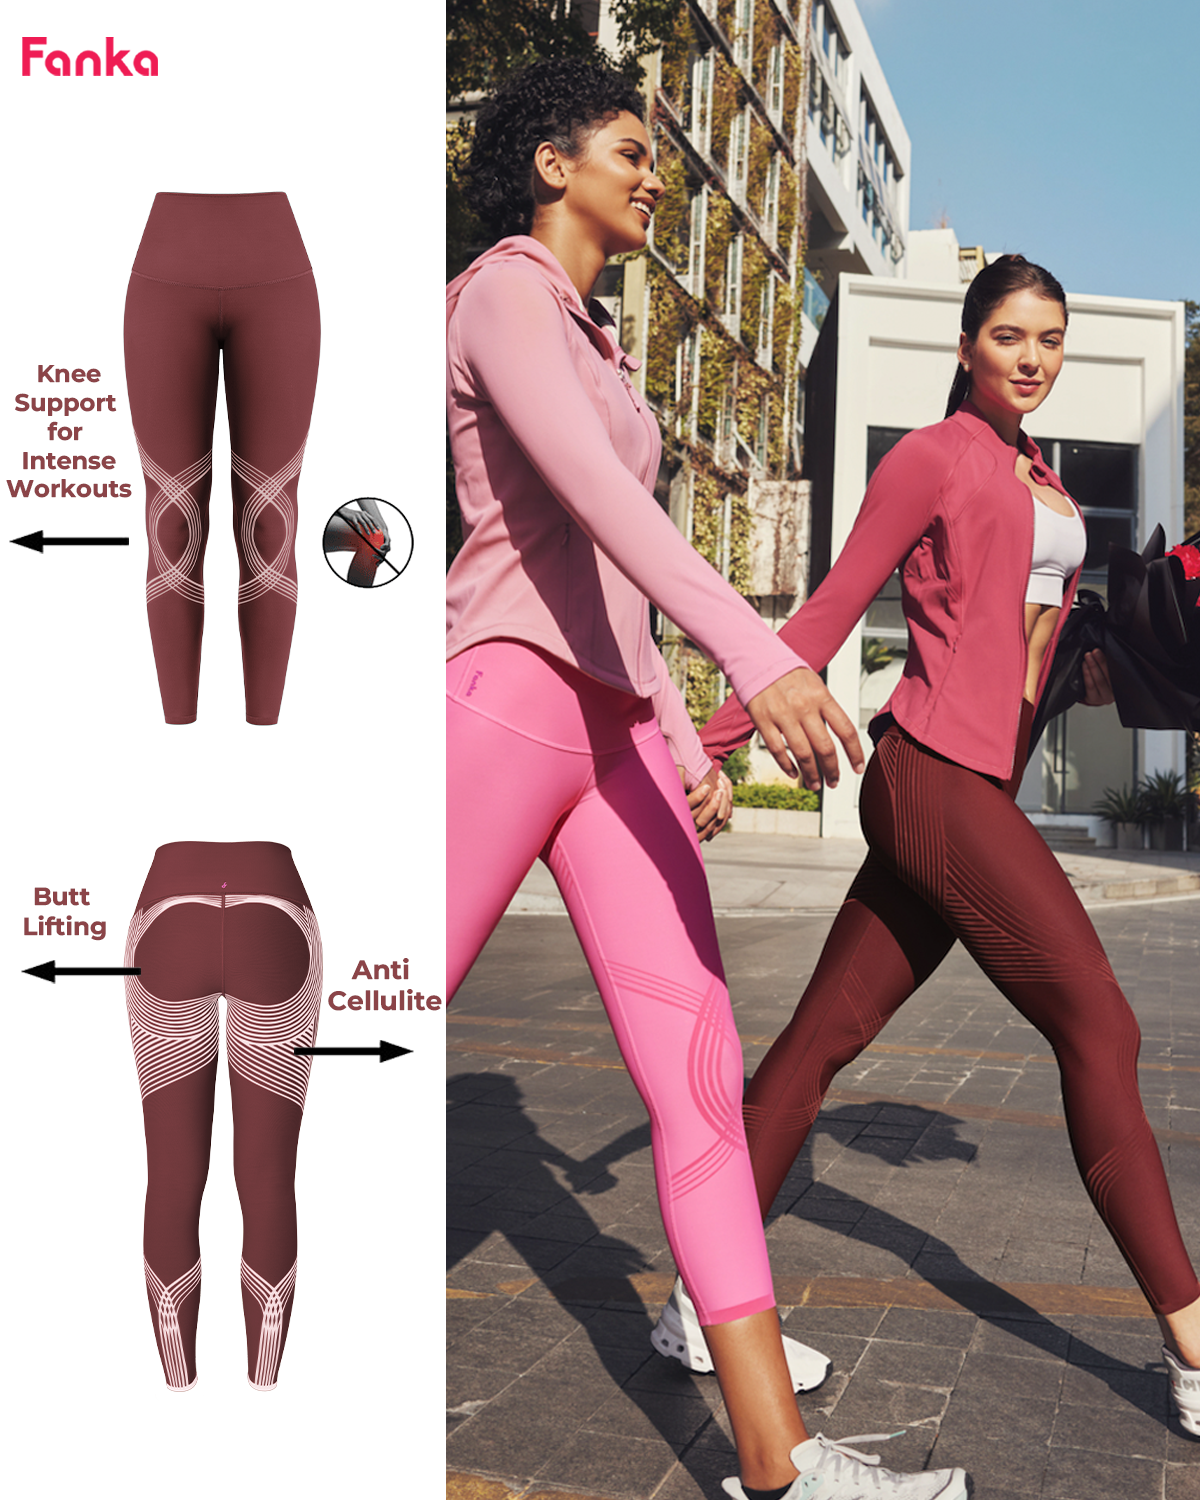 Fanka Leggings Private Sale Only For You - New Drops